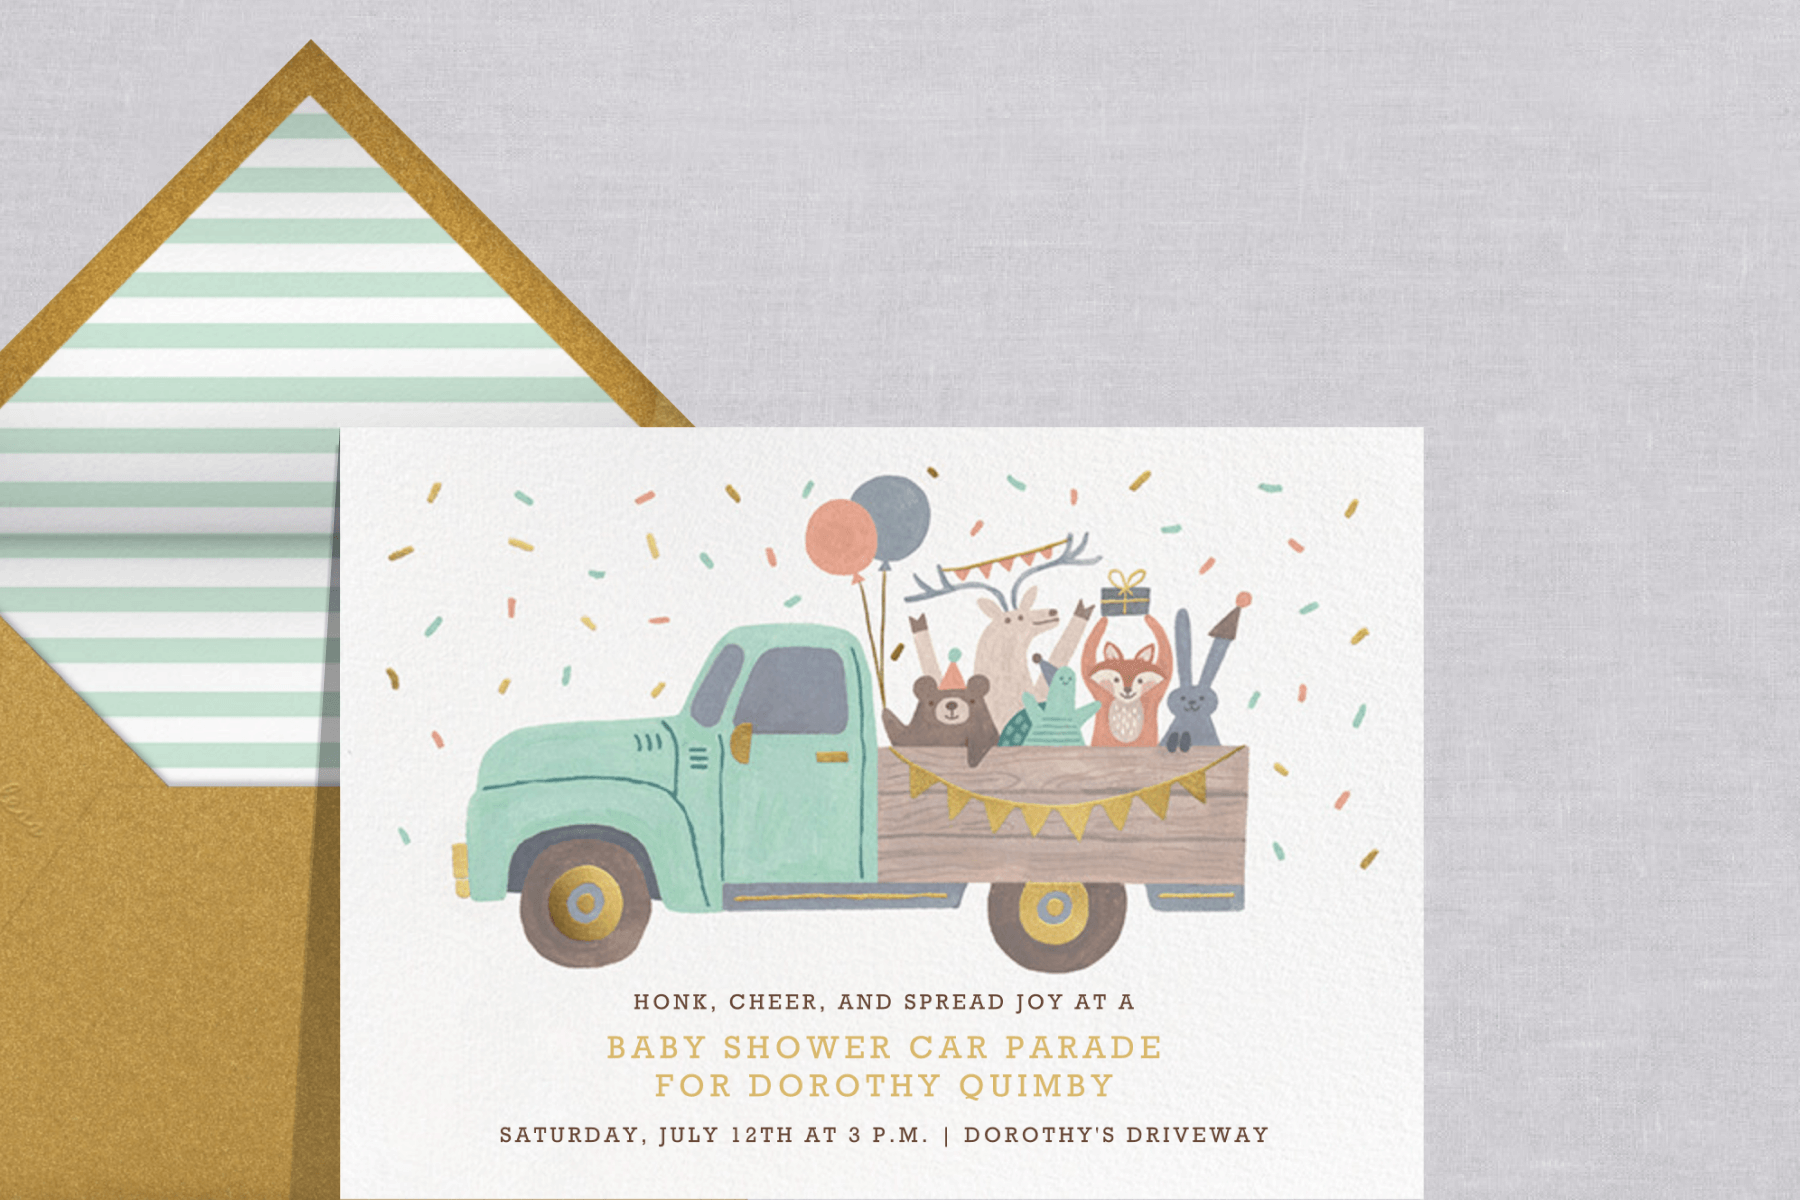 A baby shower invitation shows a pickup truck escorting forest animals in party gear.